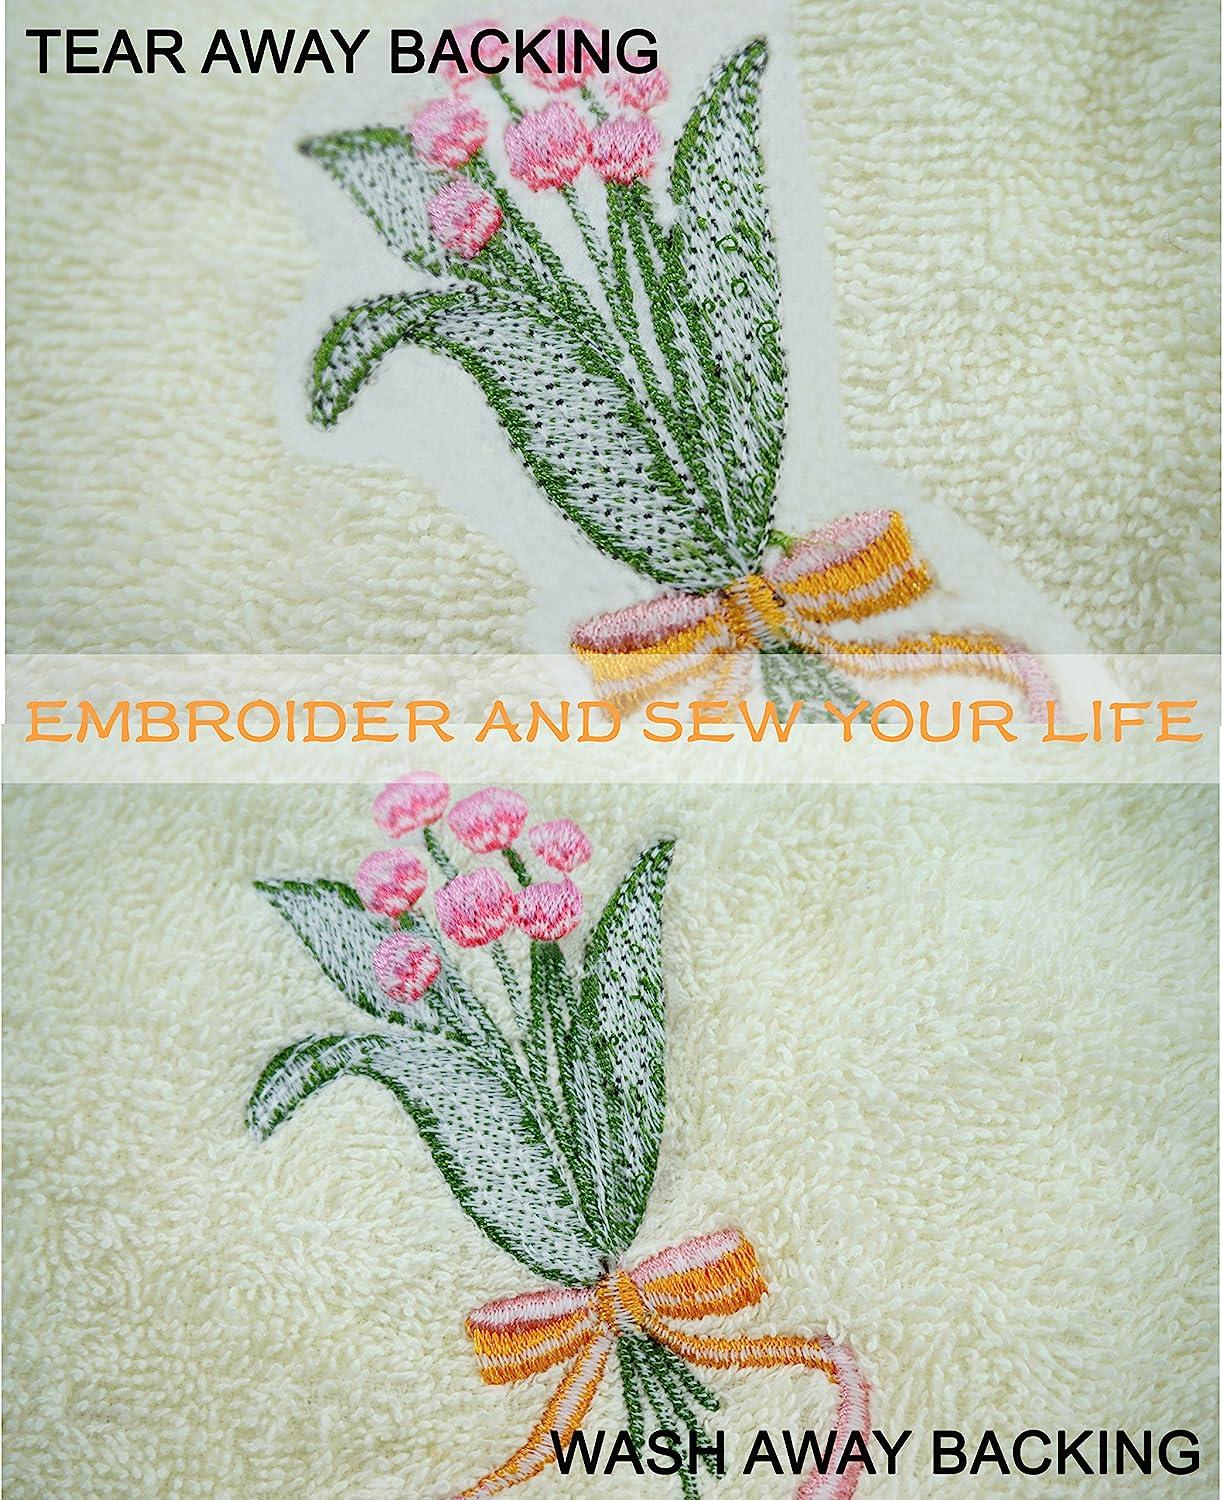  Water Soluble Stabilizer for Embroidery Backing